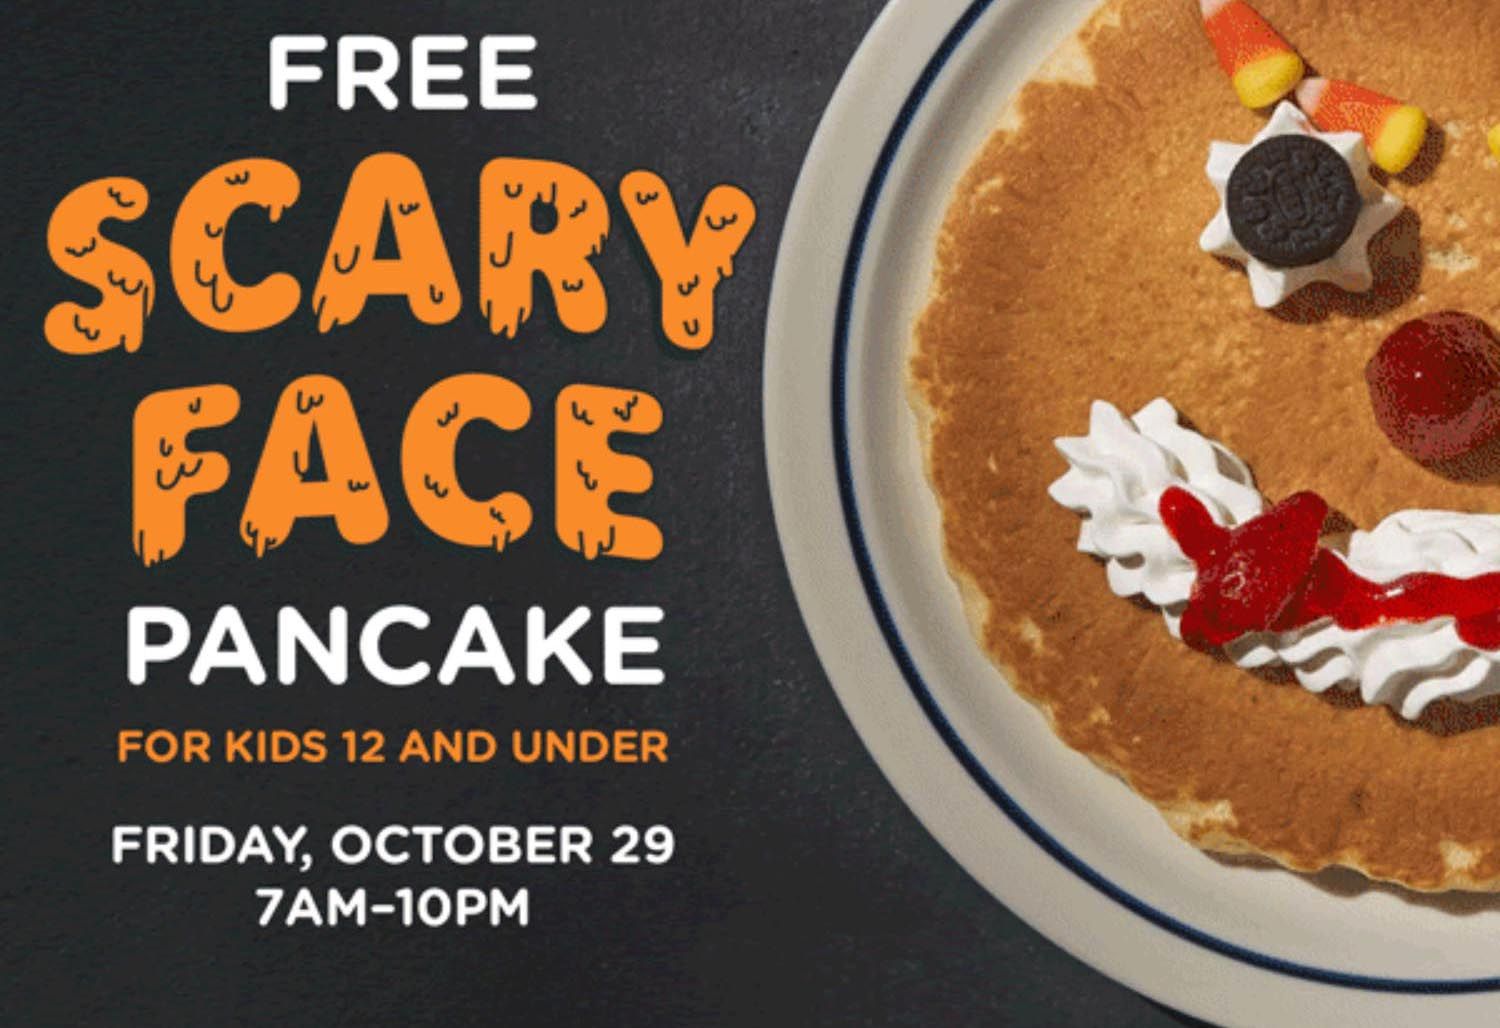 One Day Only: IHOP is Giving Away a Free Scary Face Pancake to Kids 12 and Under